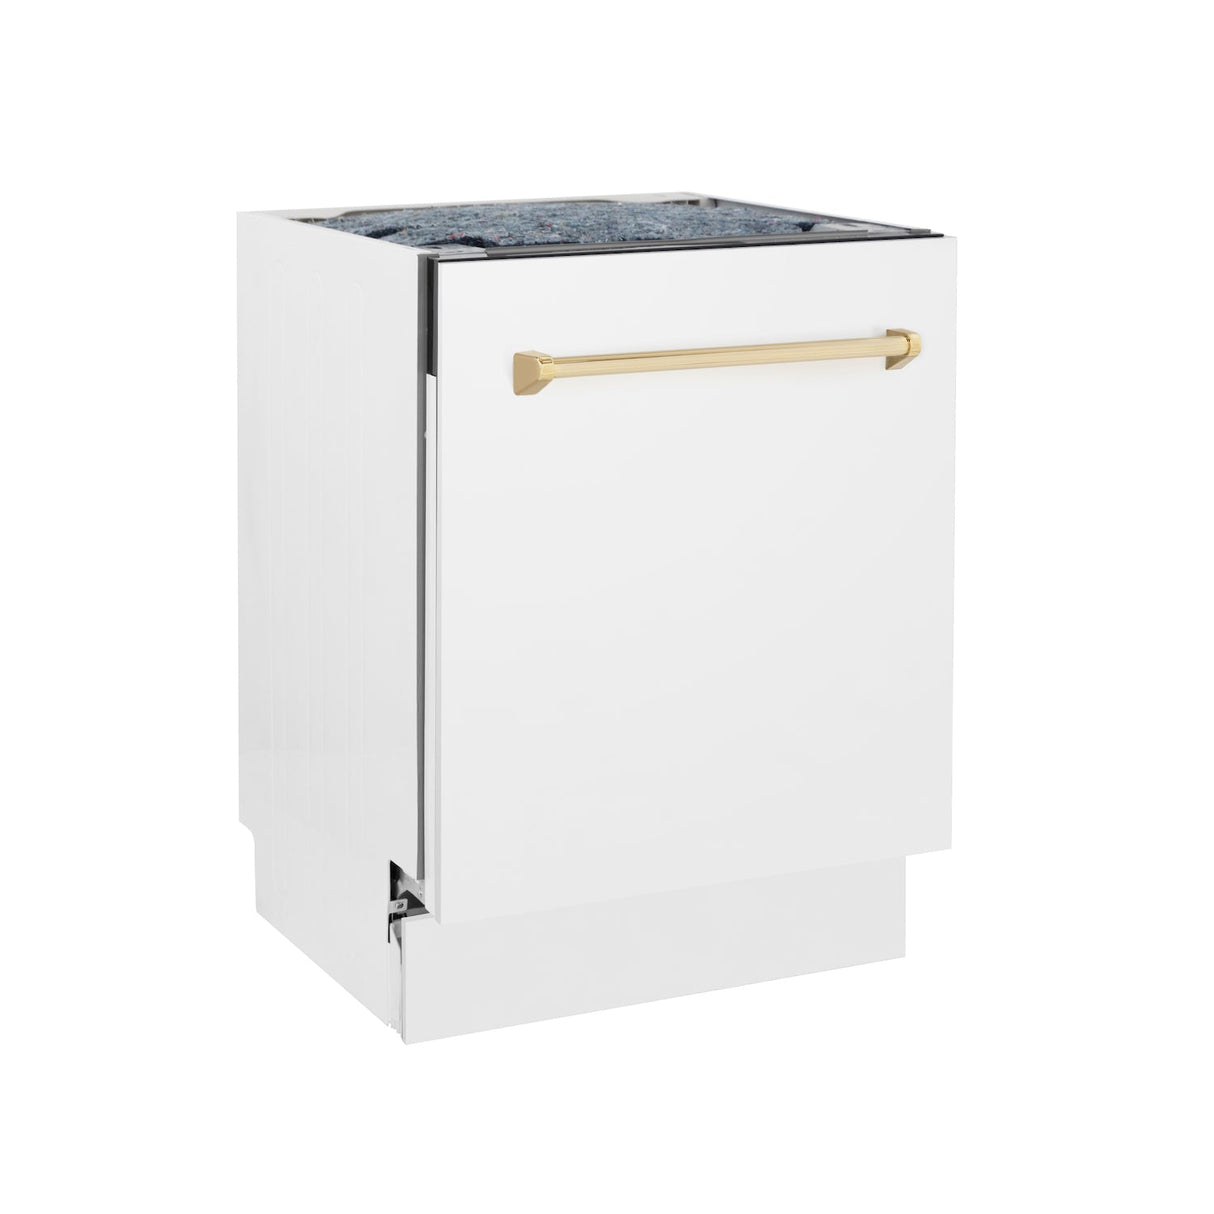 ZLINE Autograph Edition 24 in. 3rd Rack Top Control Tall Tub Dishwasher in White Matte with Polished Gold Accent Handle, 51dBa (DWVZ-WM-24-G)